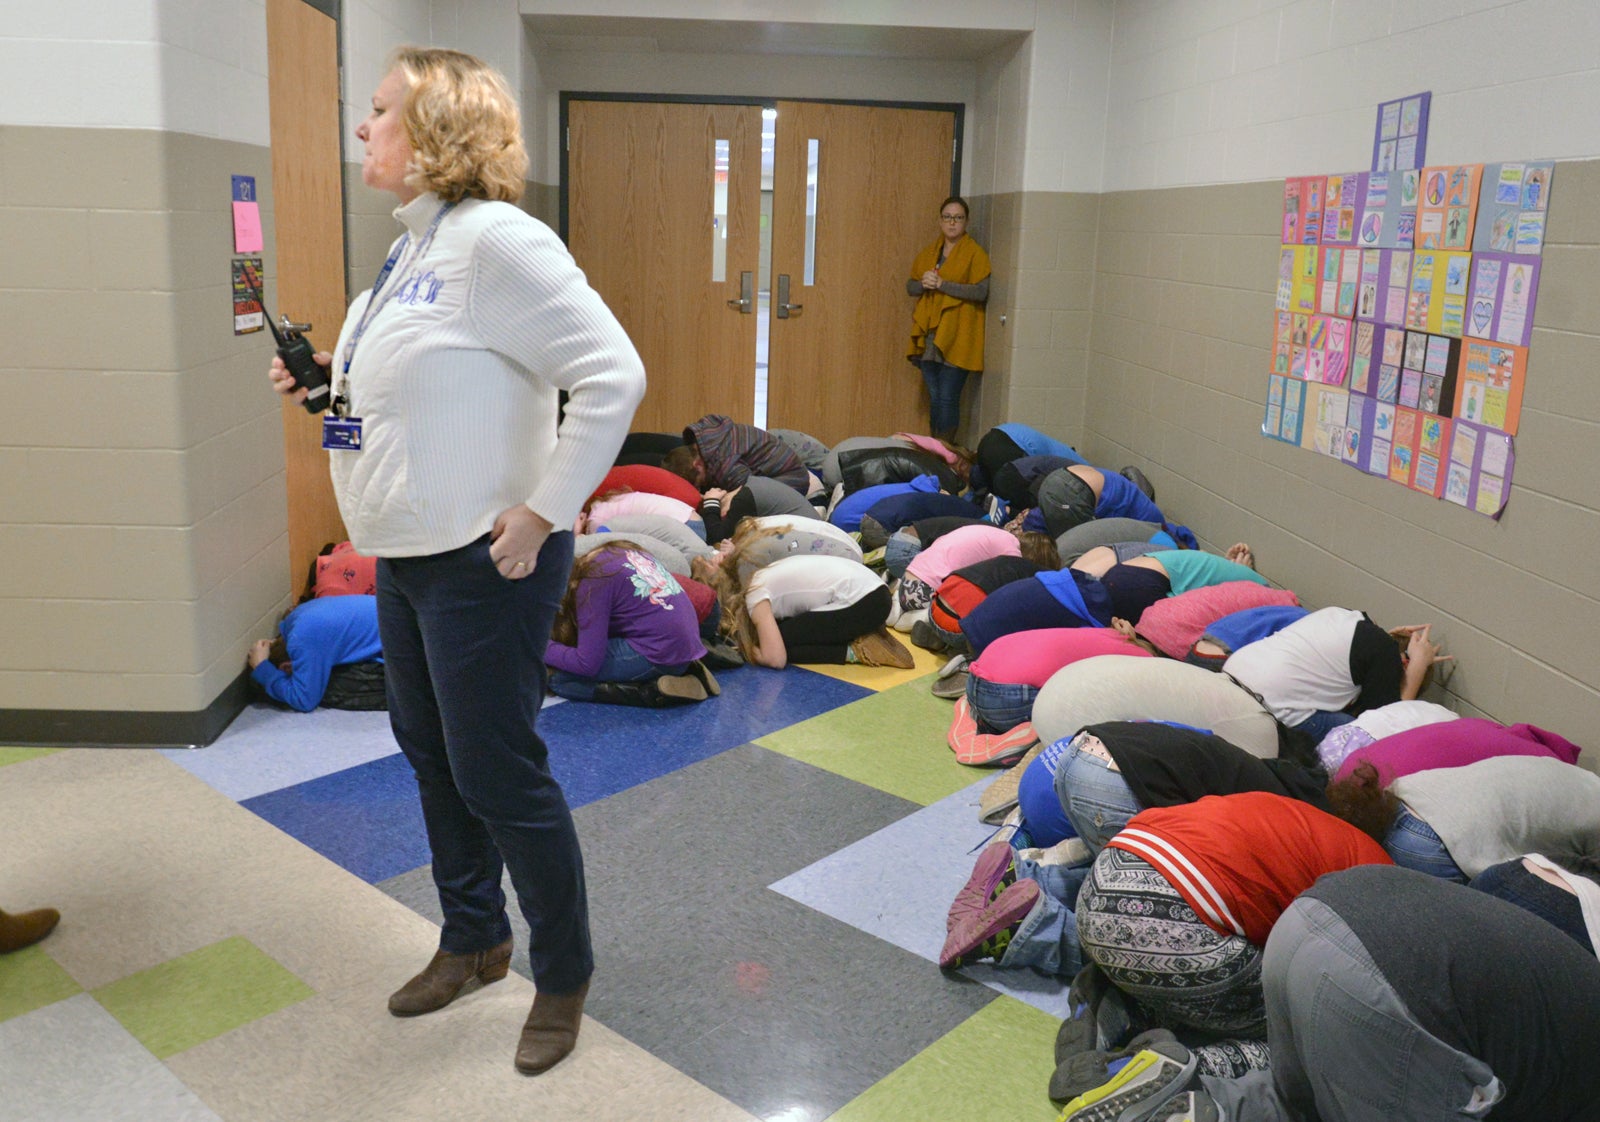 Statewide tornado drill held Wednesday The AdvocateMessenger The